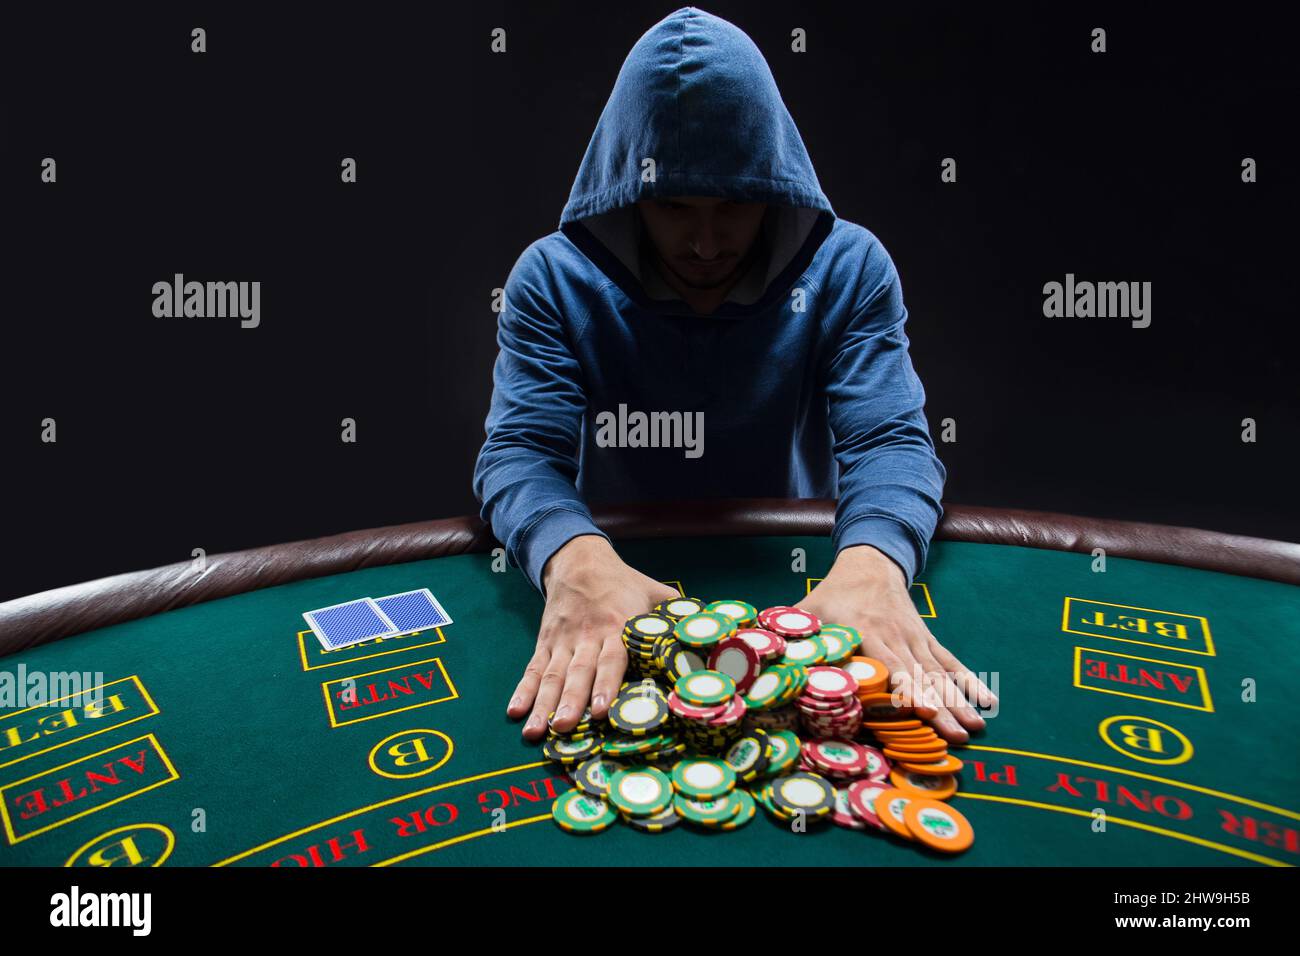 Poker player going all-in pushing his chips forward Stock Photo - Alamy